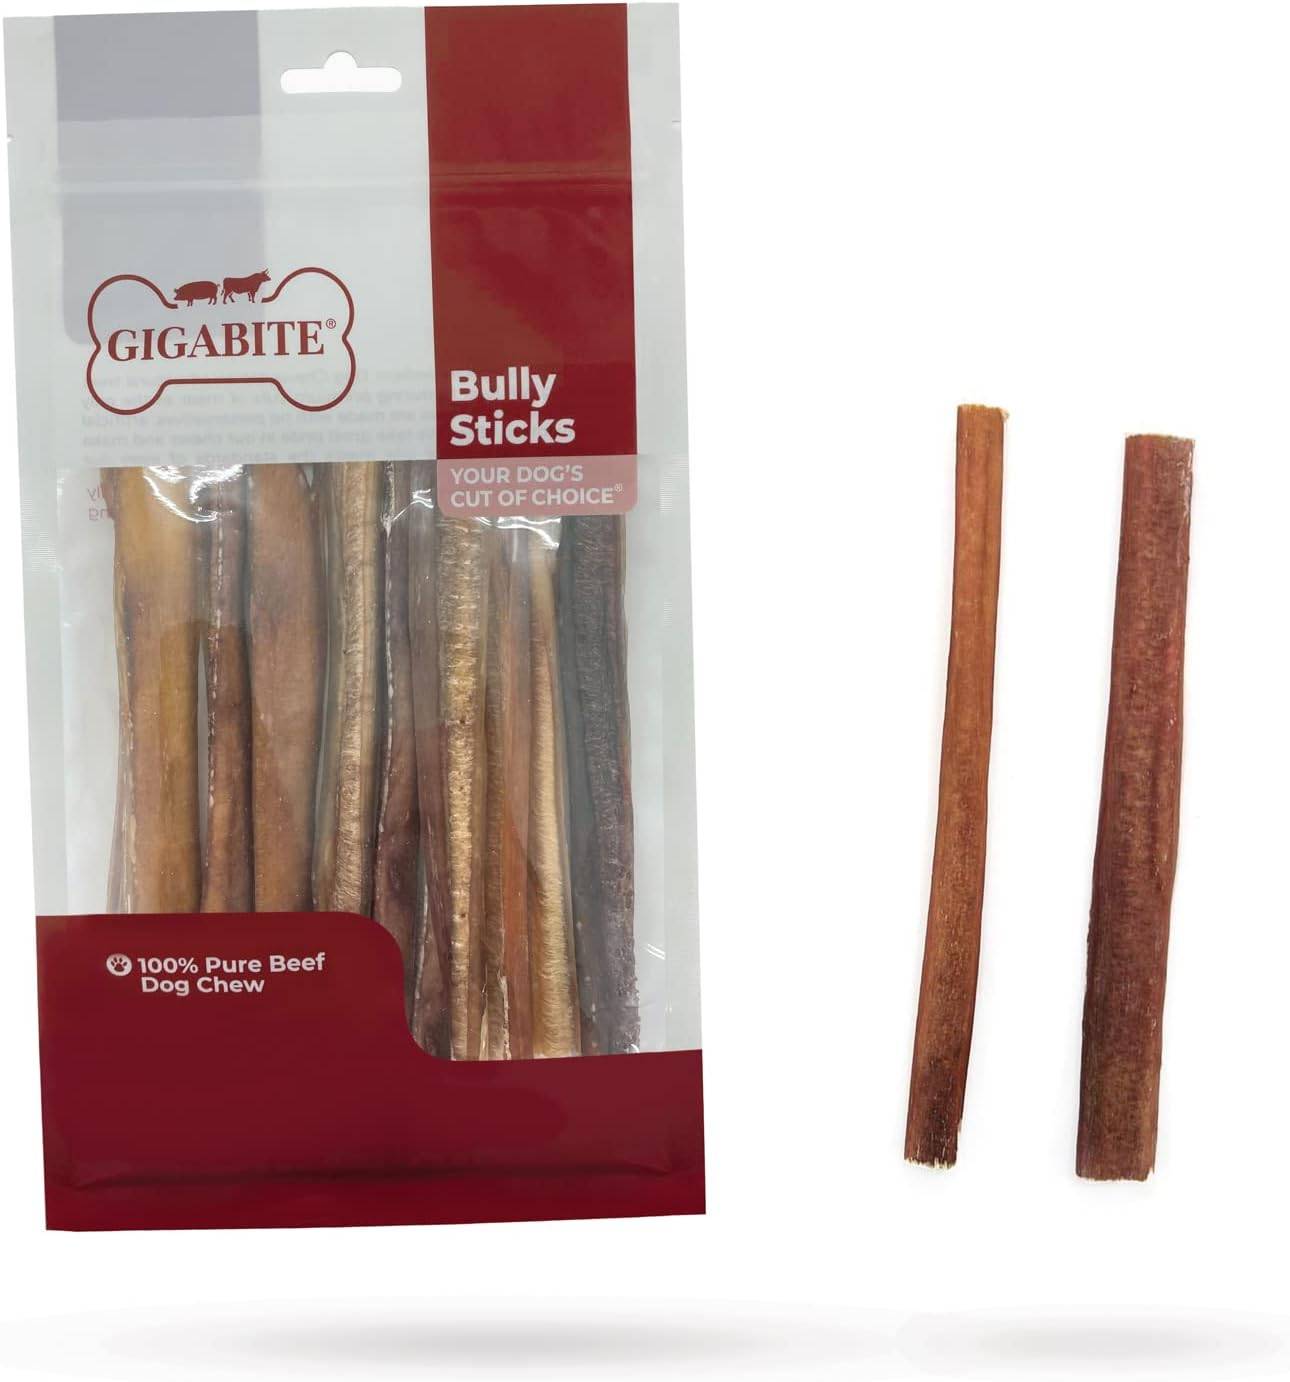 GigaBite 6 Inch Natural Odor Bully Sticks Treats (10 Pack) All Natural, Free Range Beef Pizzle Dog Chews – by Best Pet Supplies